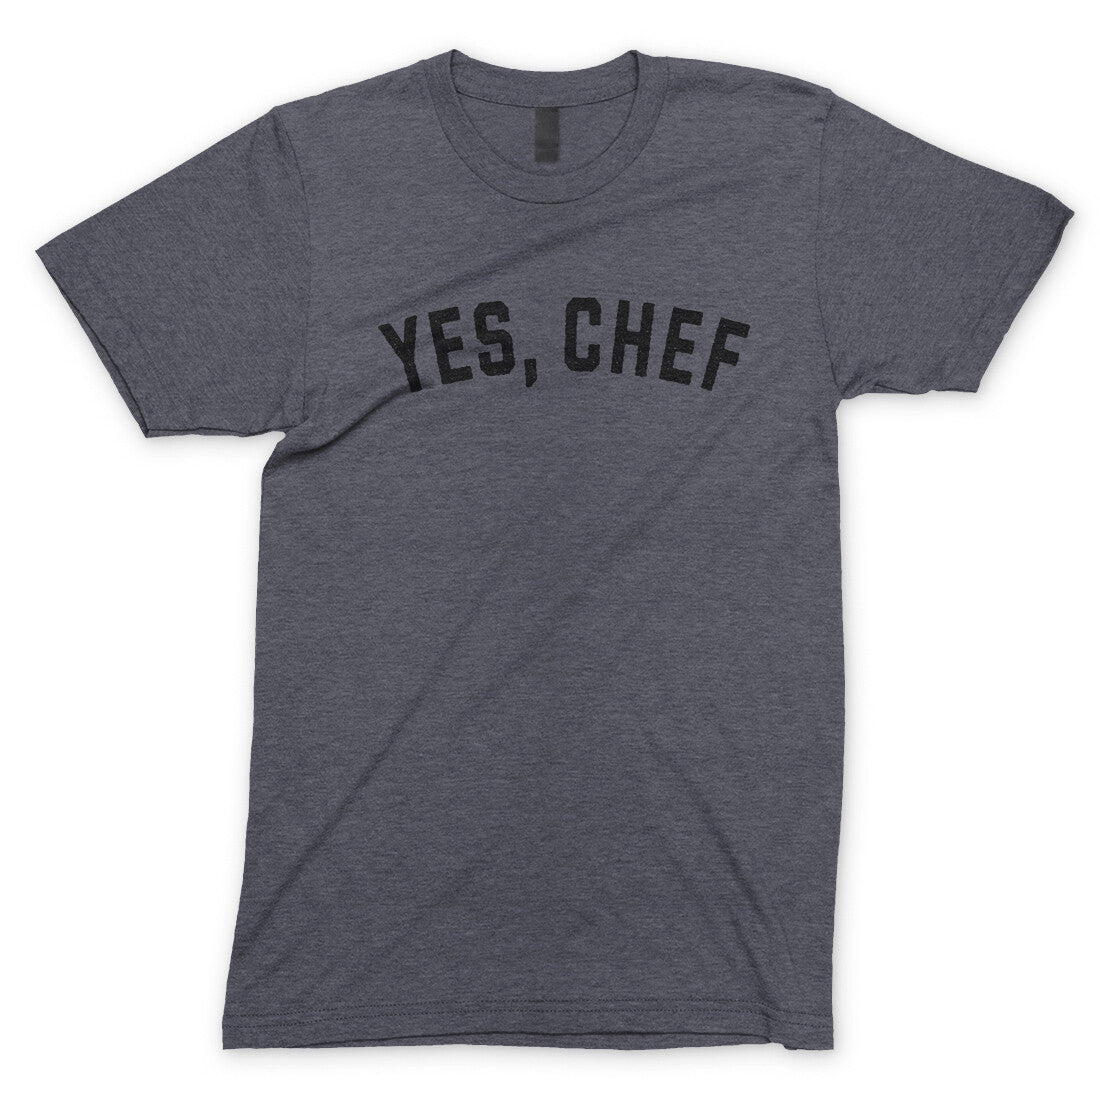 Yes Chef in Dark Heather Color